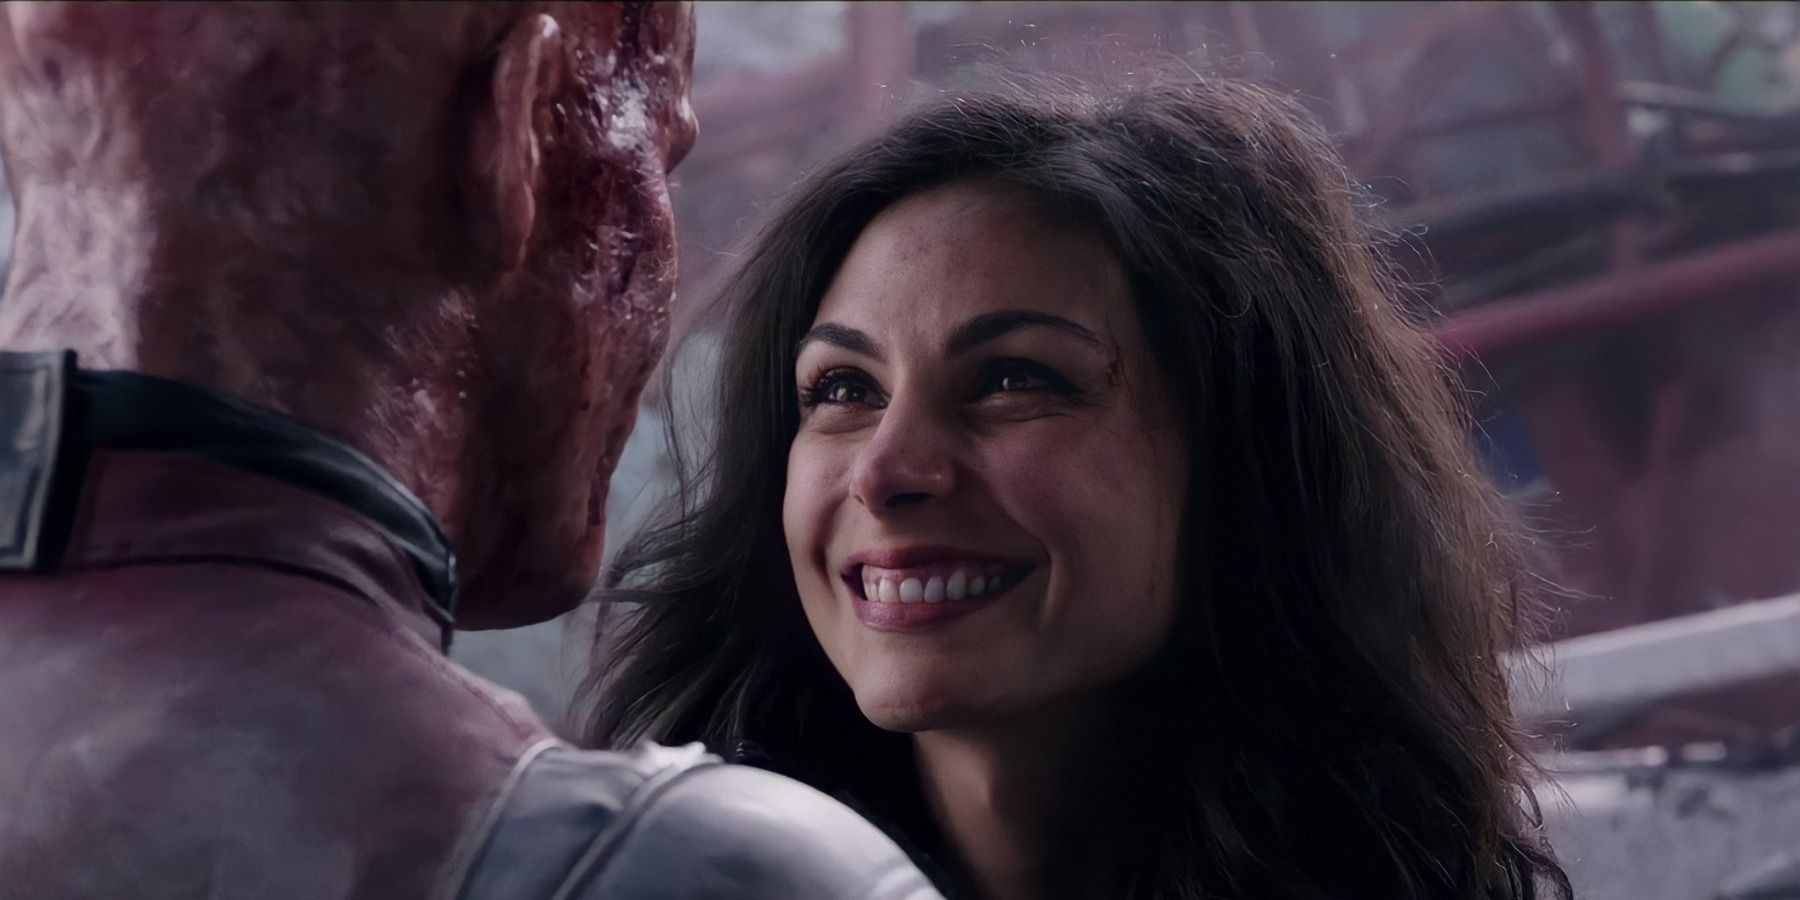 Morena Baccarin as Vanessa smiling in Deadpool